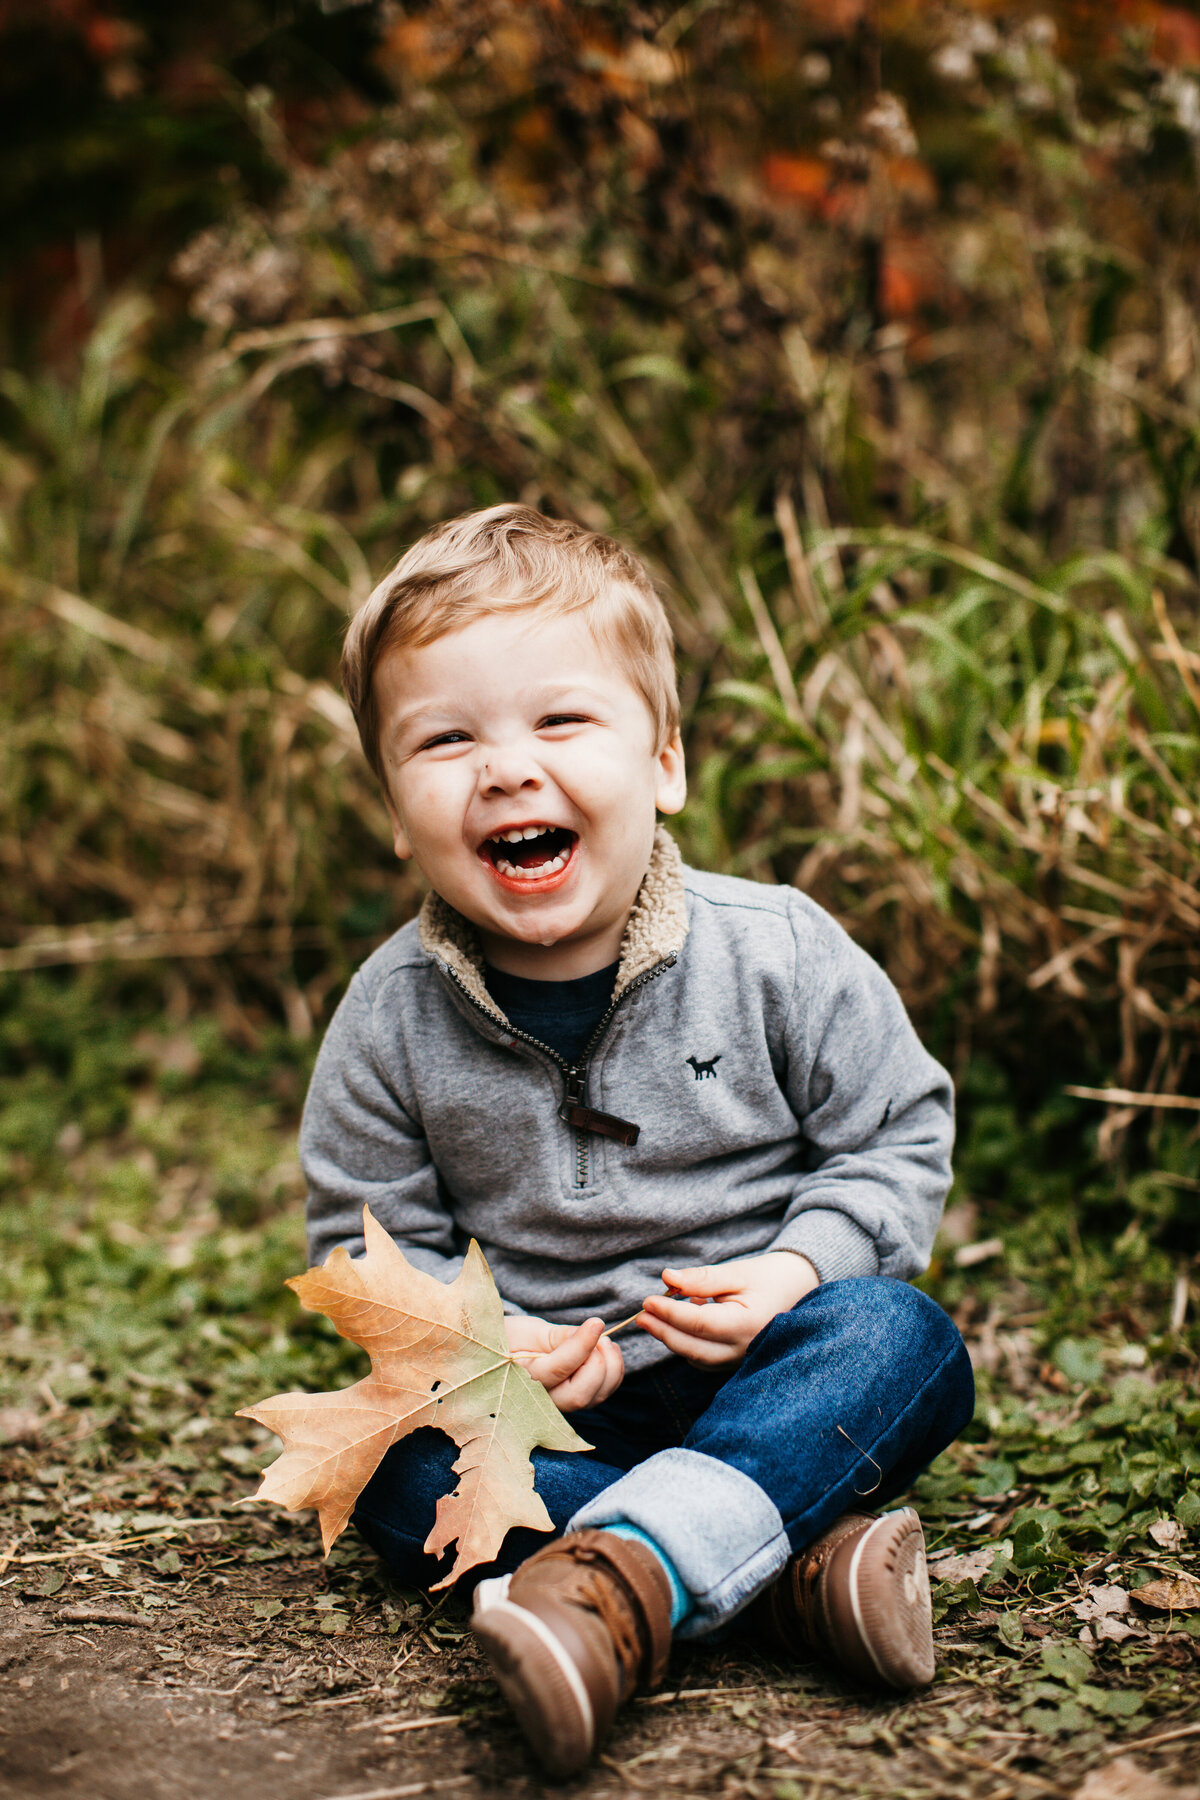 little boy sitting on ground laughing playing in leaves